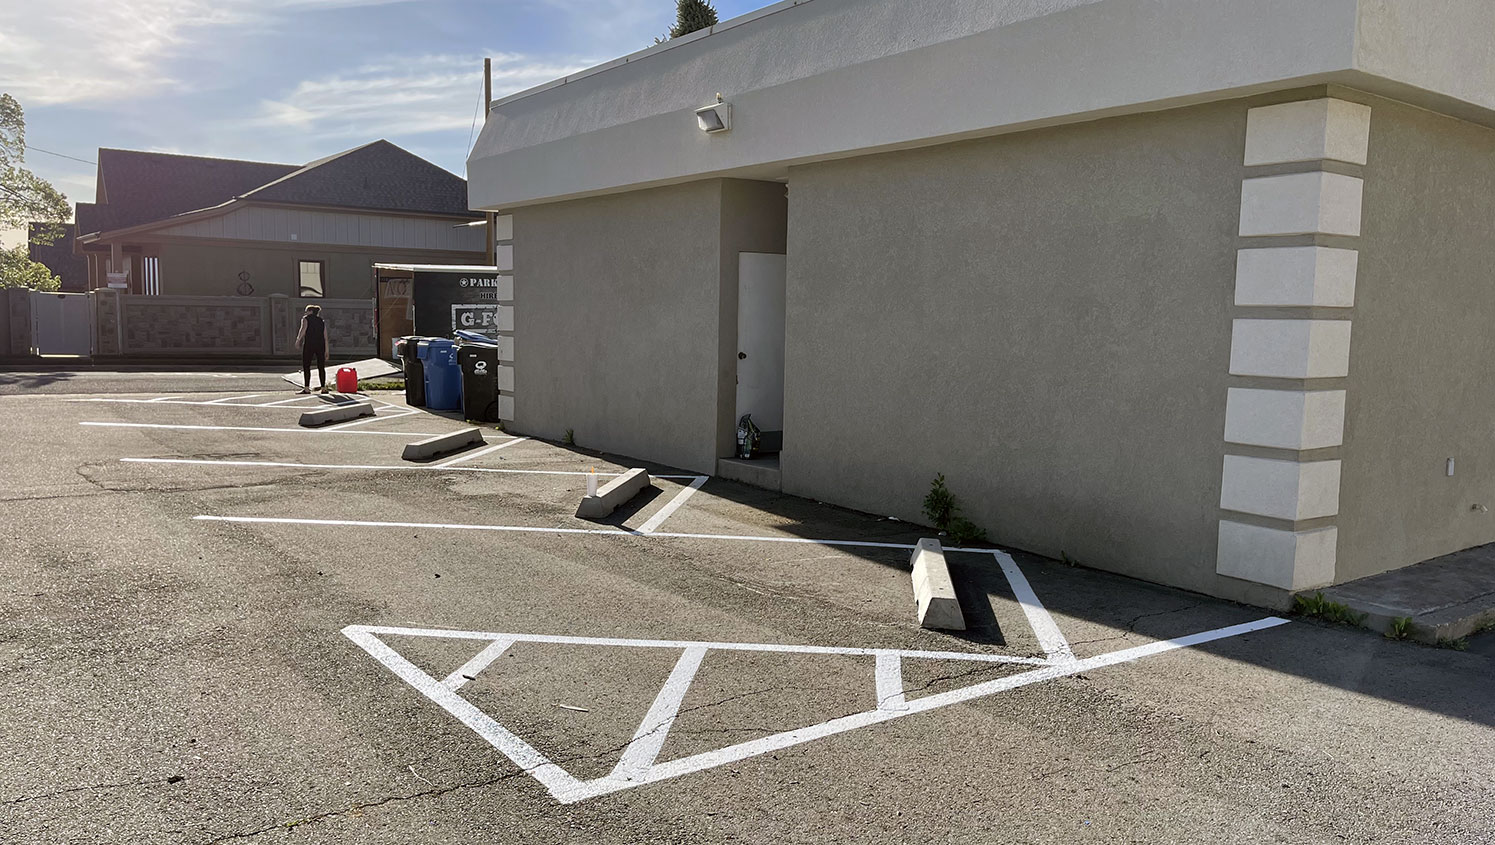 new parking lot stalls and wheel stops at Rising Health Specialty Clinic in Millcreek, UT